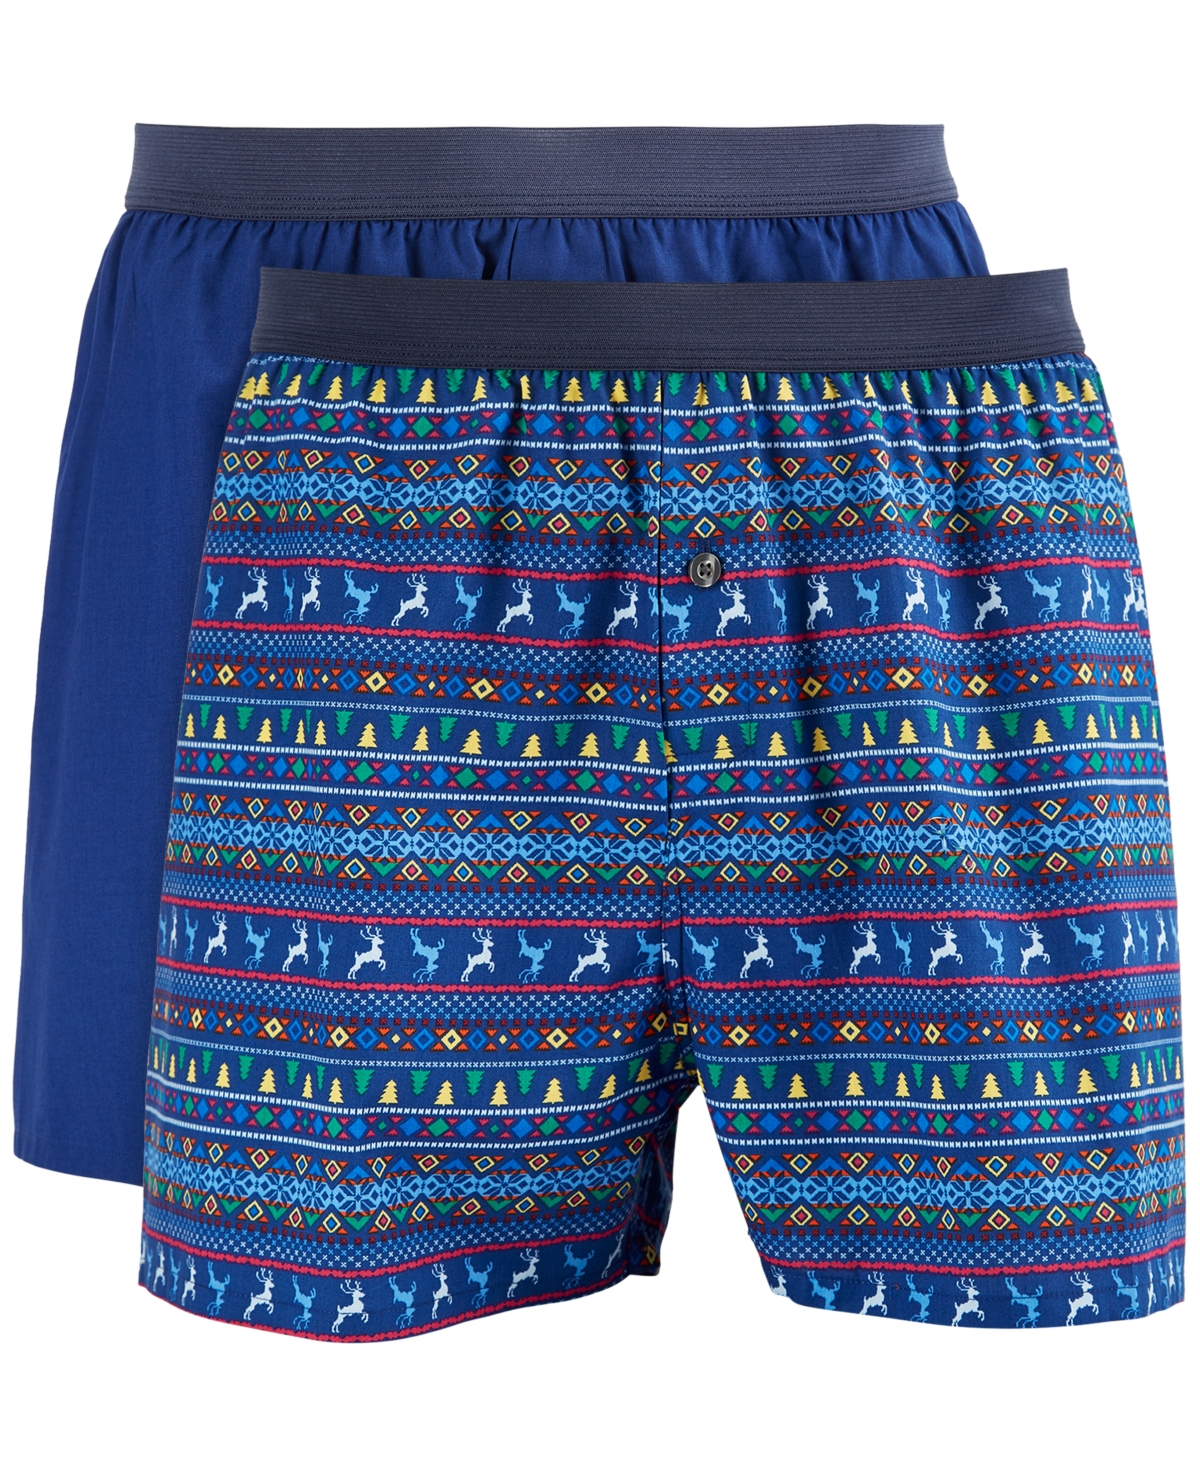 Club Room Men's 2-pk. Patterned & Solid Boxer Shorts, Created for Macy's